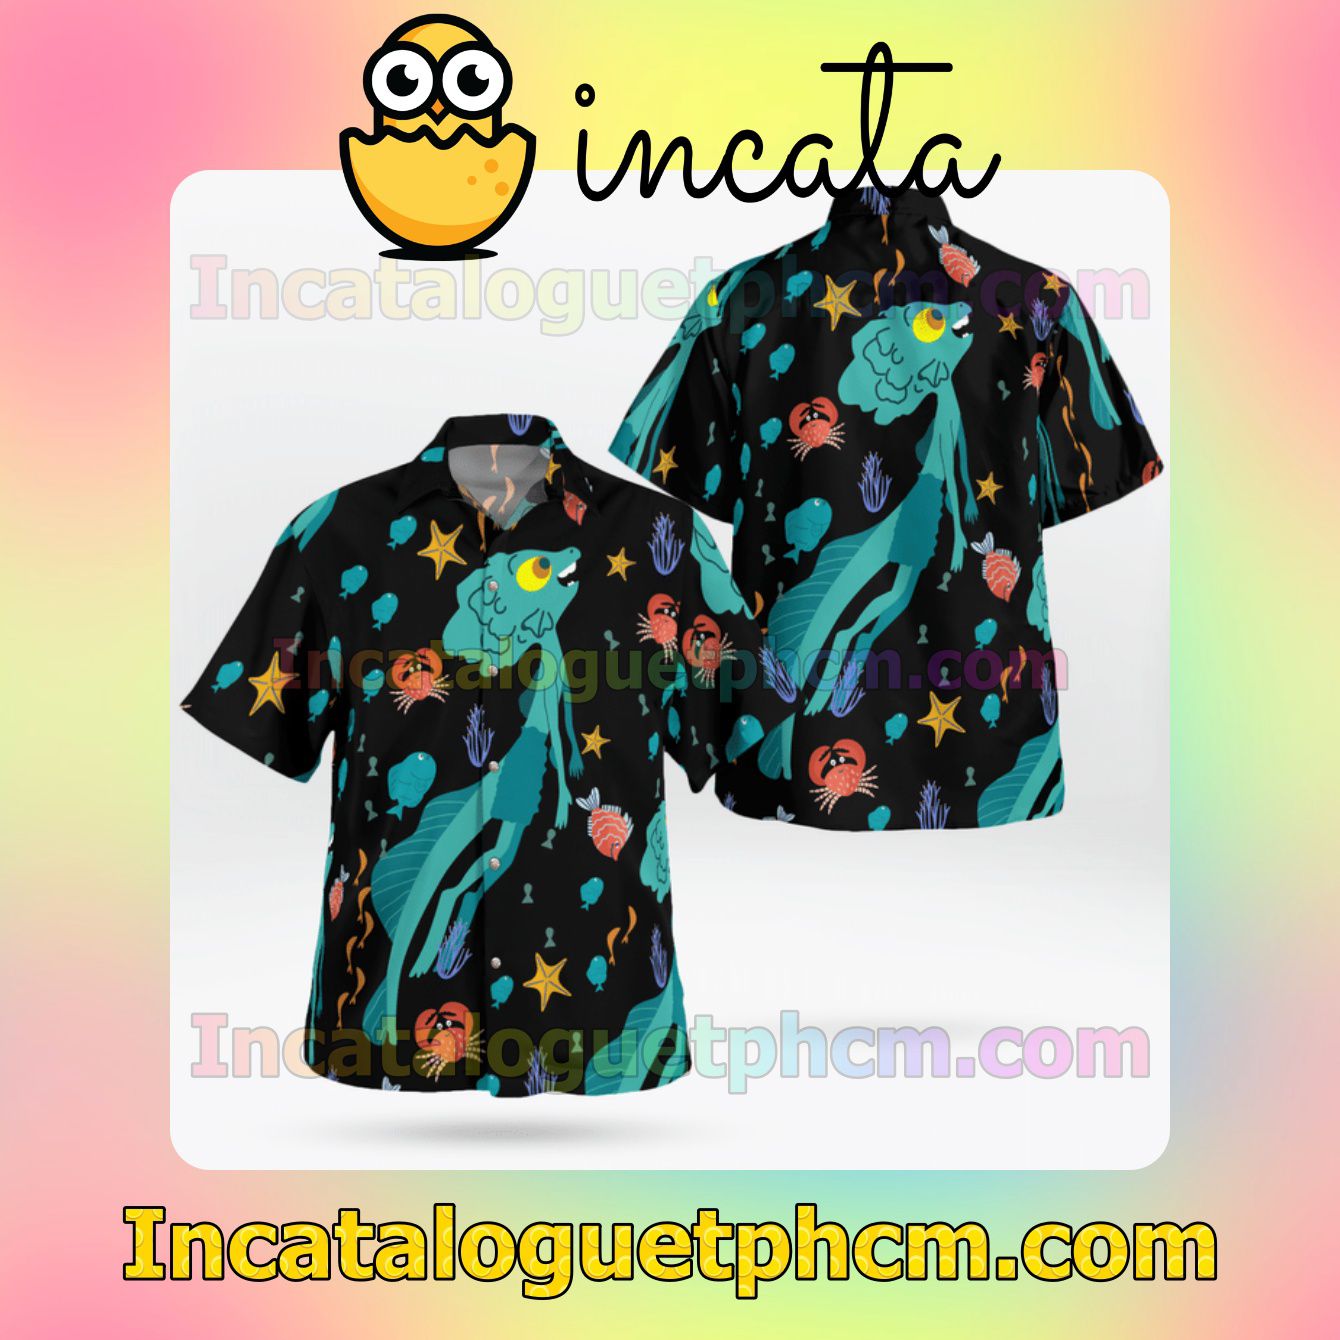 Disney Pixar Luca Swimming With Fishes Mens Short Sleeve Shirts